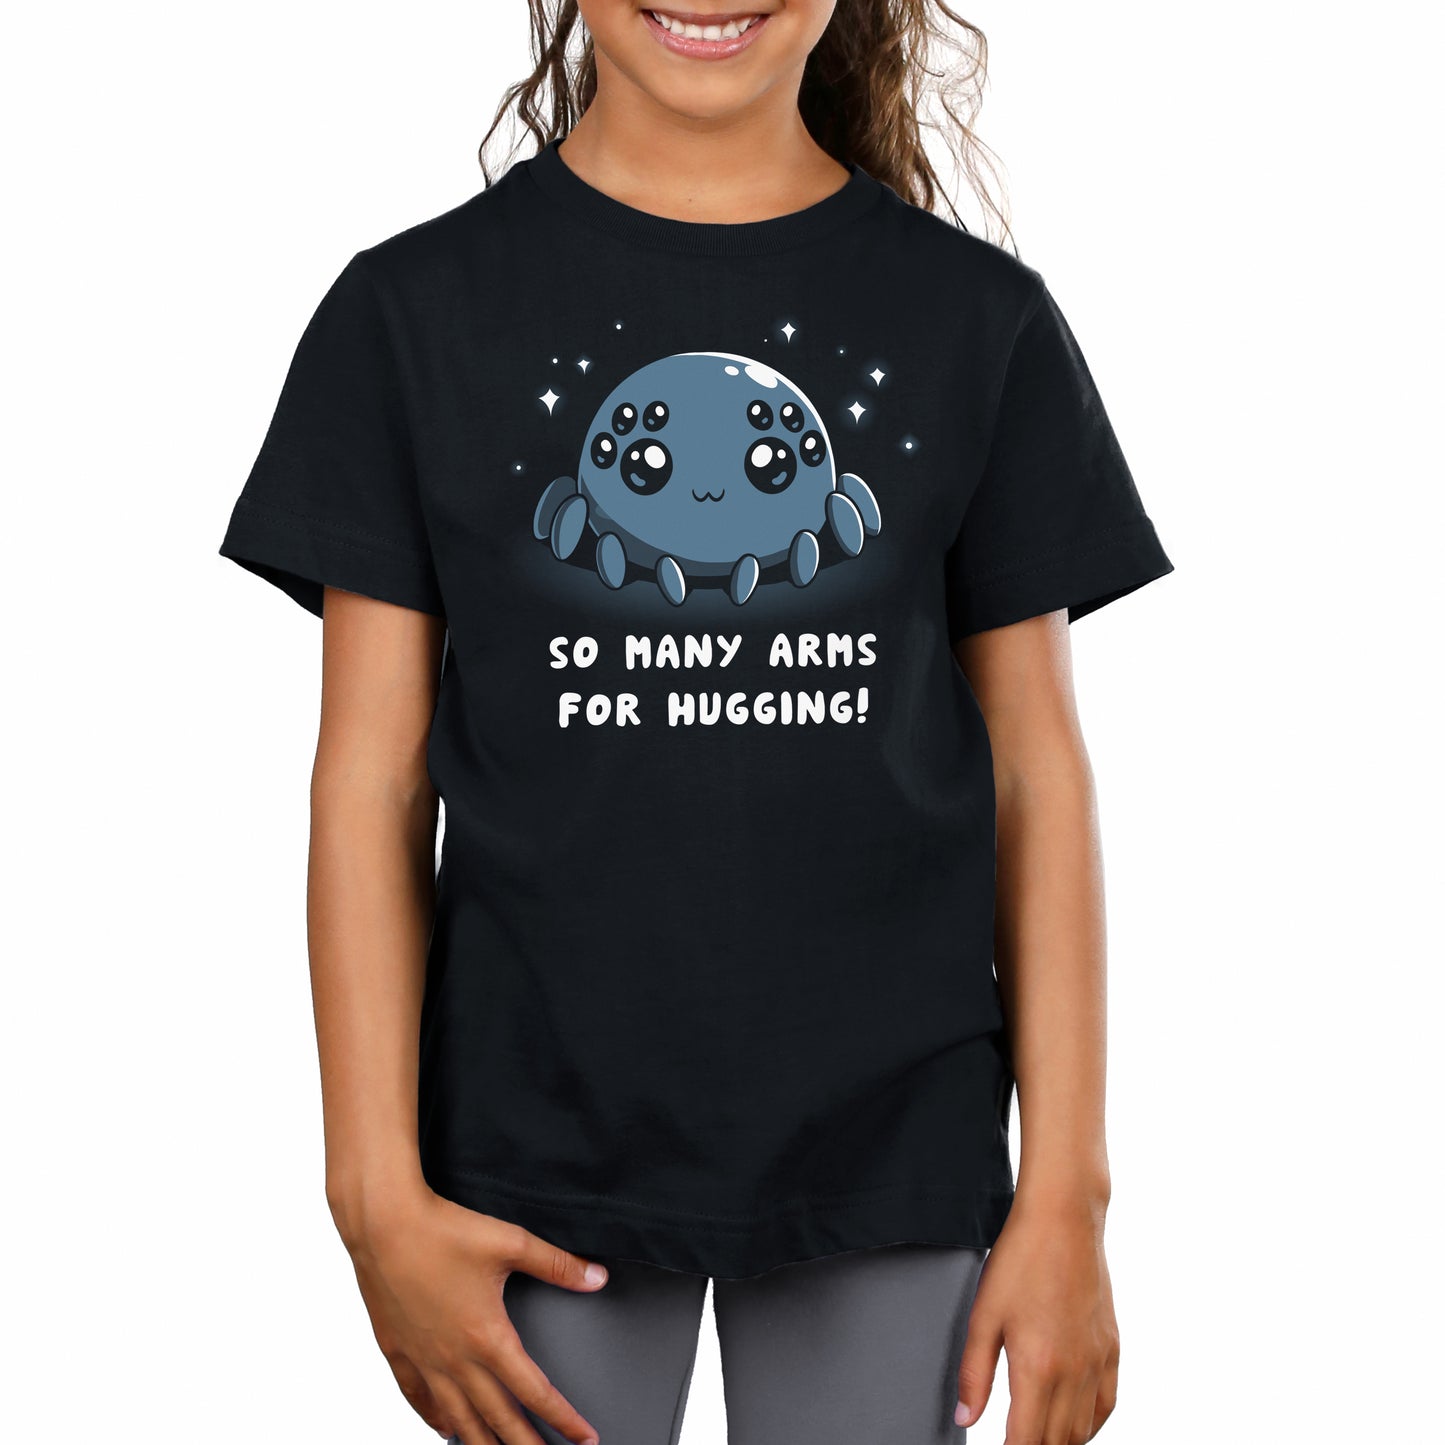 A girl wearing a black t-shirt that says "TeeTurtle Spider Hugs.